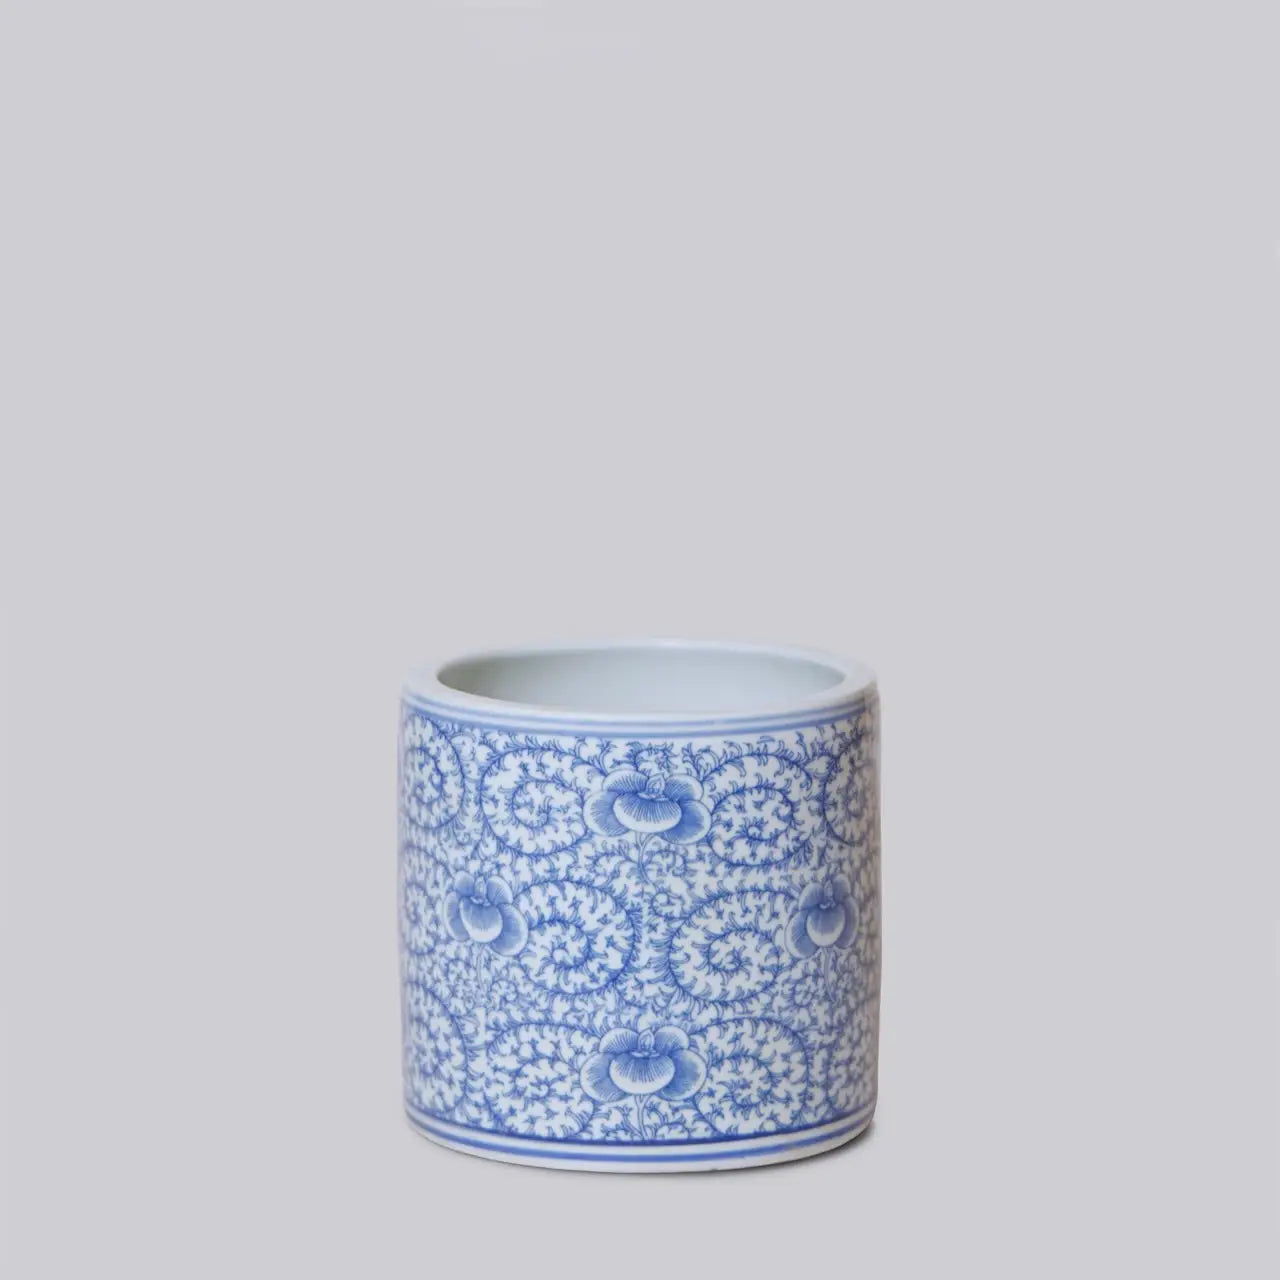 Small Blue and White Porcelain Scrolling Peony Cachepot